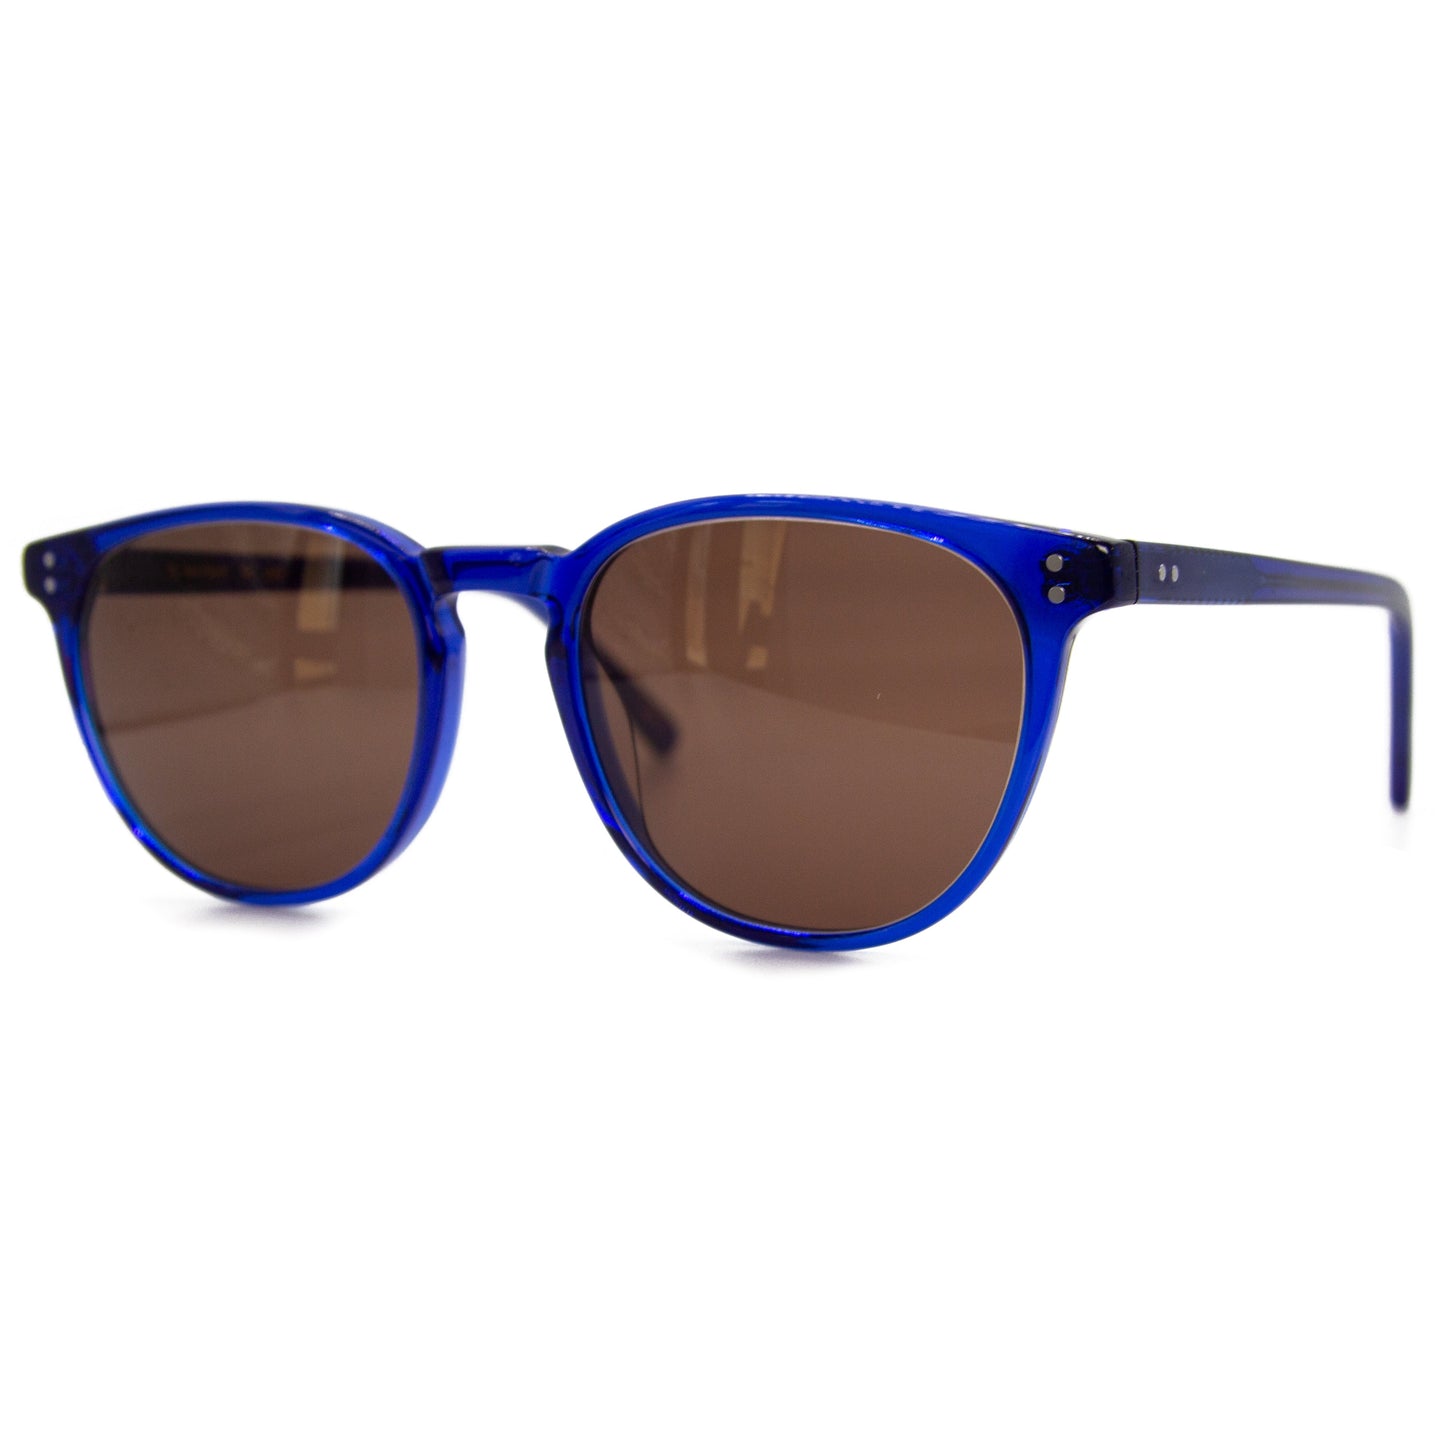 3 brothers - Ant - Navy - Prescription Sunglasses - Side